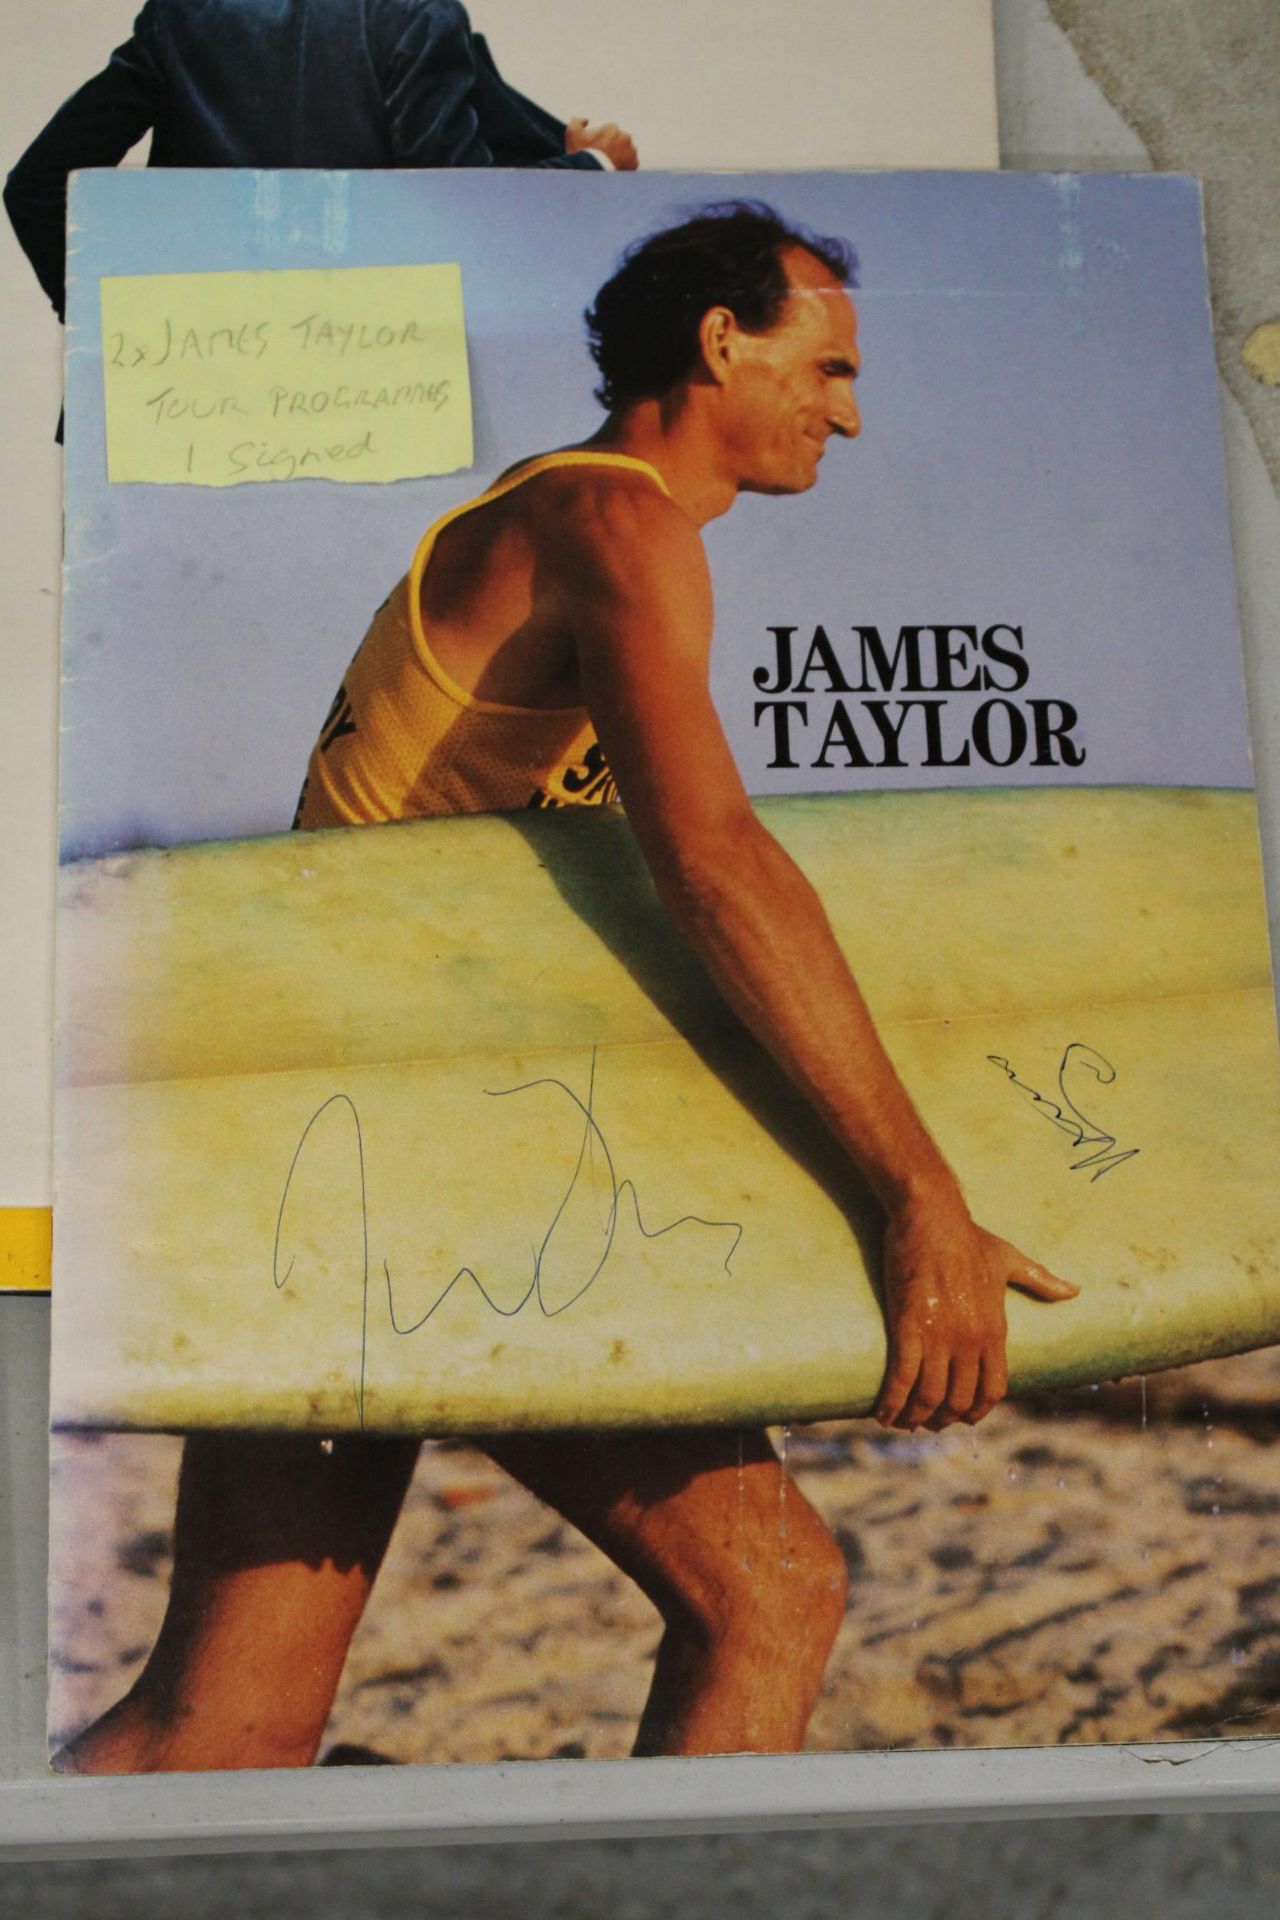 SEVEN JAMES TAYLOR LP RECORD PLUS TWO JAMES TAYLOR PROGRAMMES, ONE SIGNED - Image 4 of 5